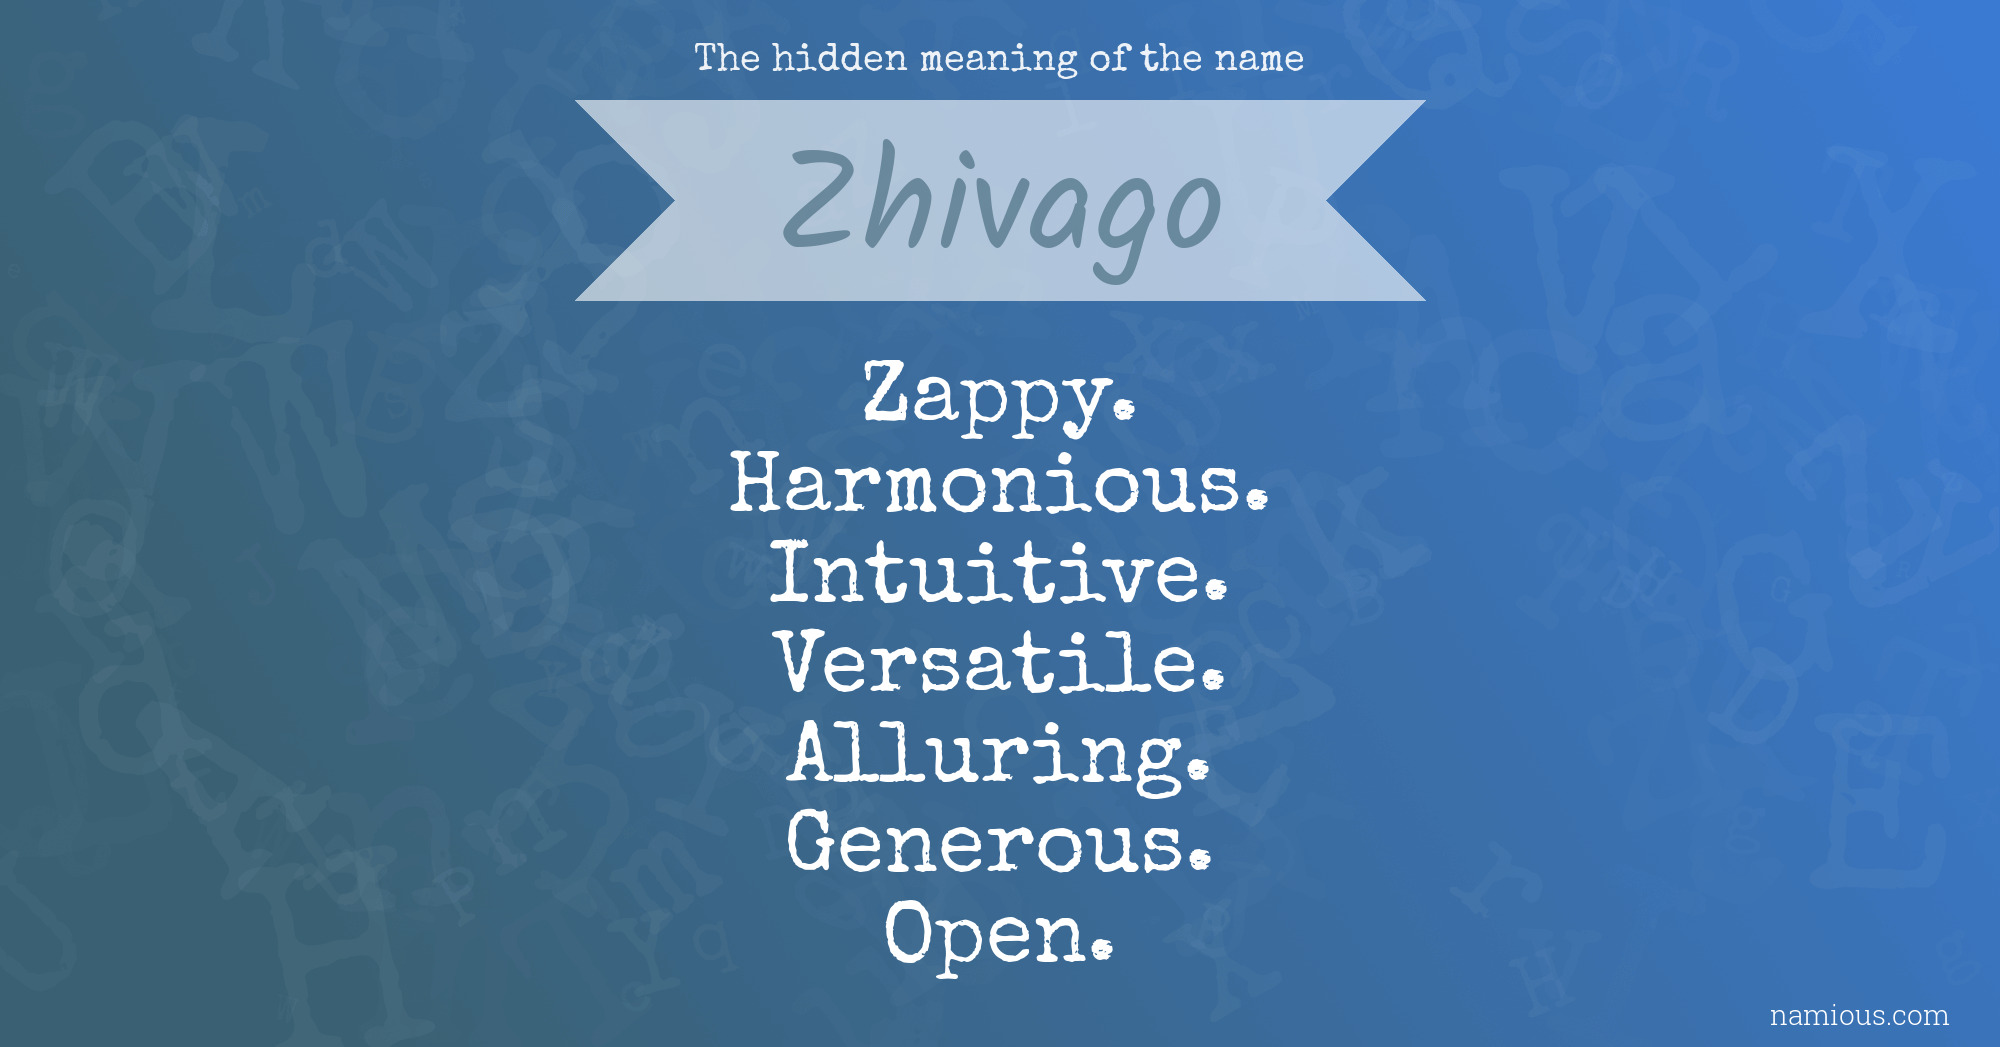 The hidden meaning of the name Zhivago